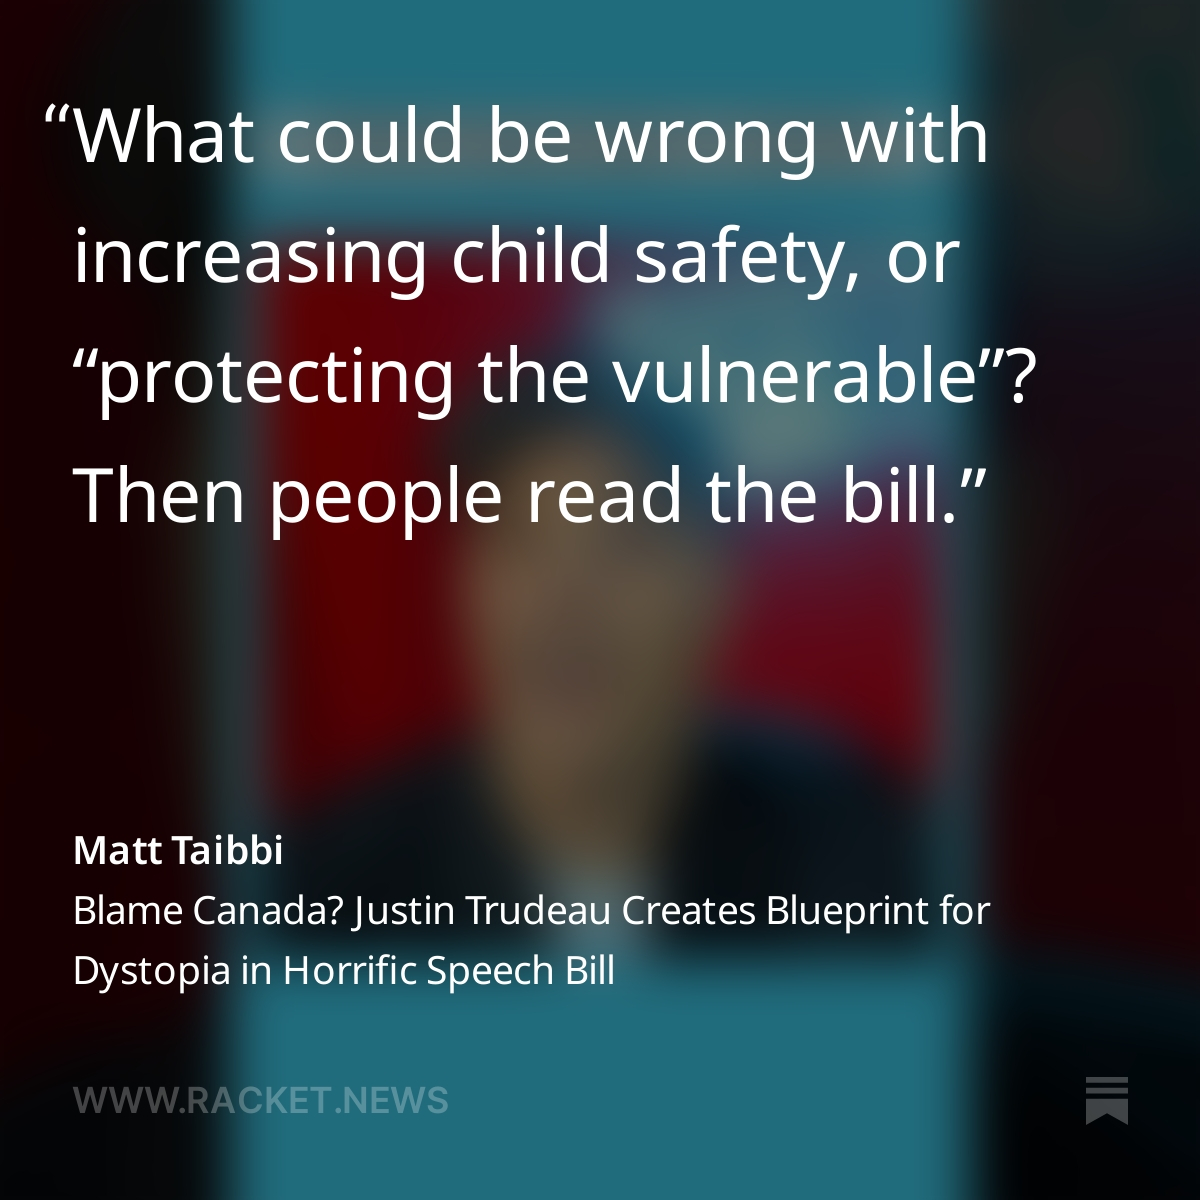 To summarize Taibbi, the Online Harms Act creates transformational new procedures such as enlisting  Canadians in a social monitoring system that rewards hate informants, includes criminal penalties for hate speech and jail time for retroactive or future hate offenses, and it can…